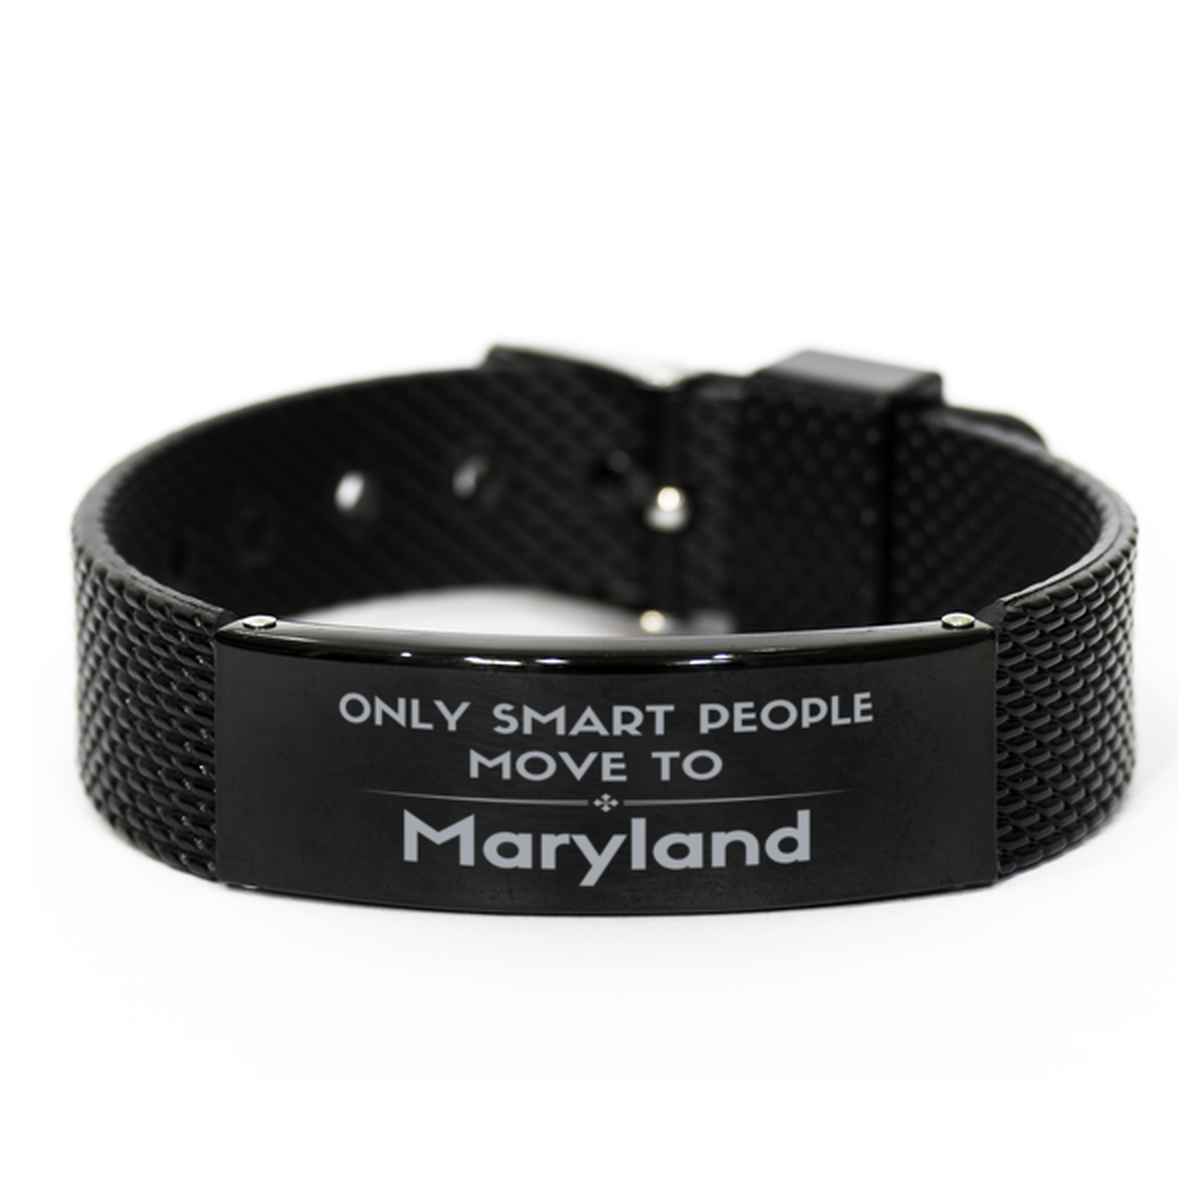 Only smart people move to Maryland Black Shark Mesh Bracelet, Gag Gifts For Maryland, Move to Maryland Gifts for Friends Coworker Funny Saying Quote